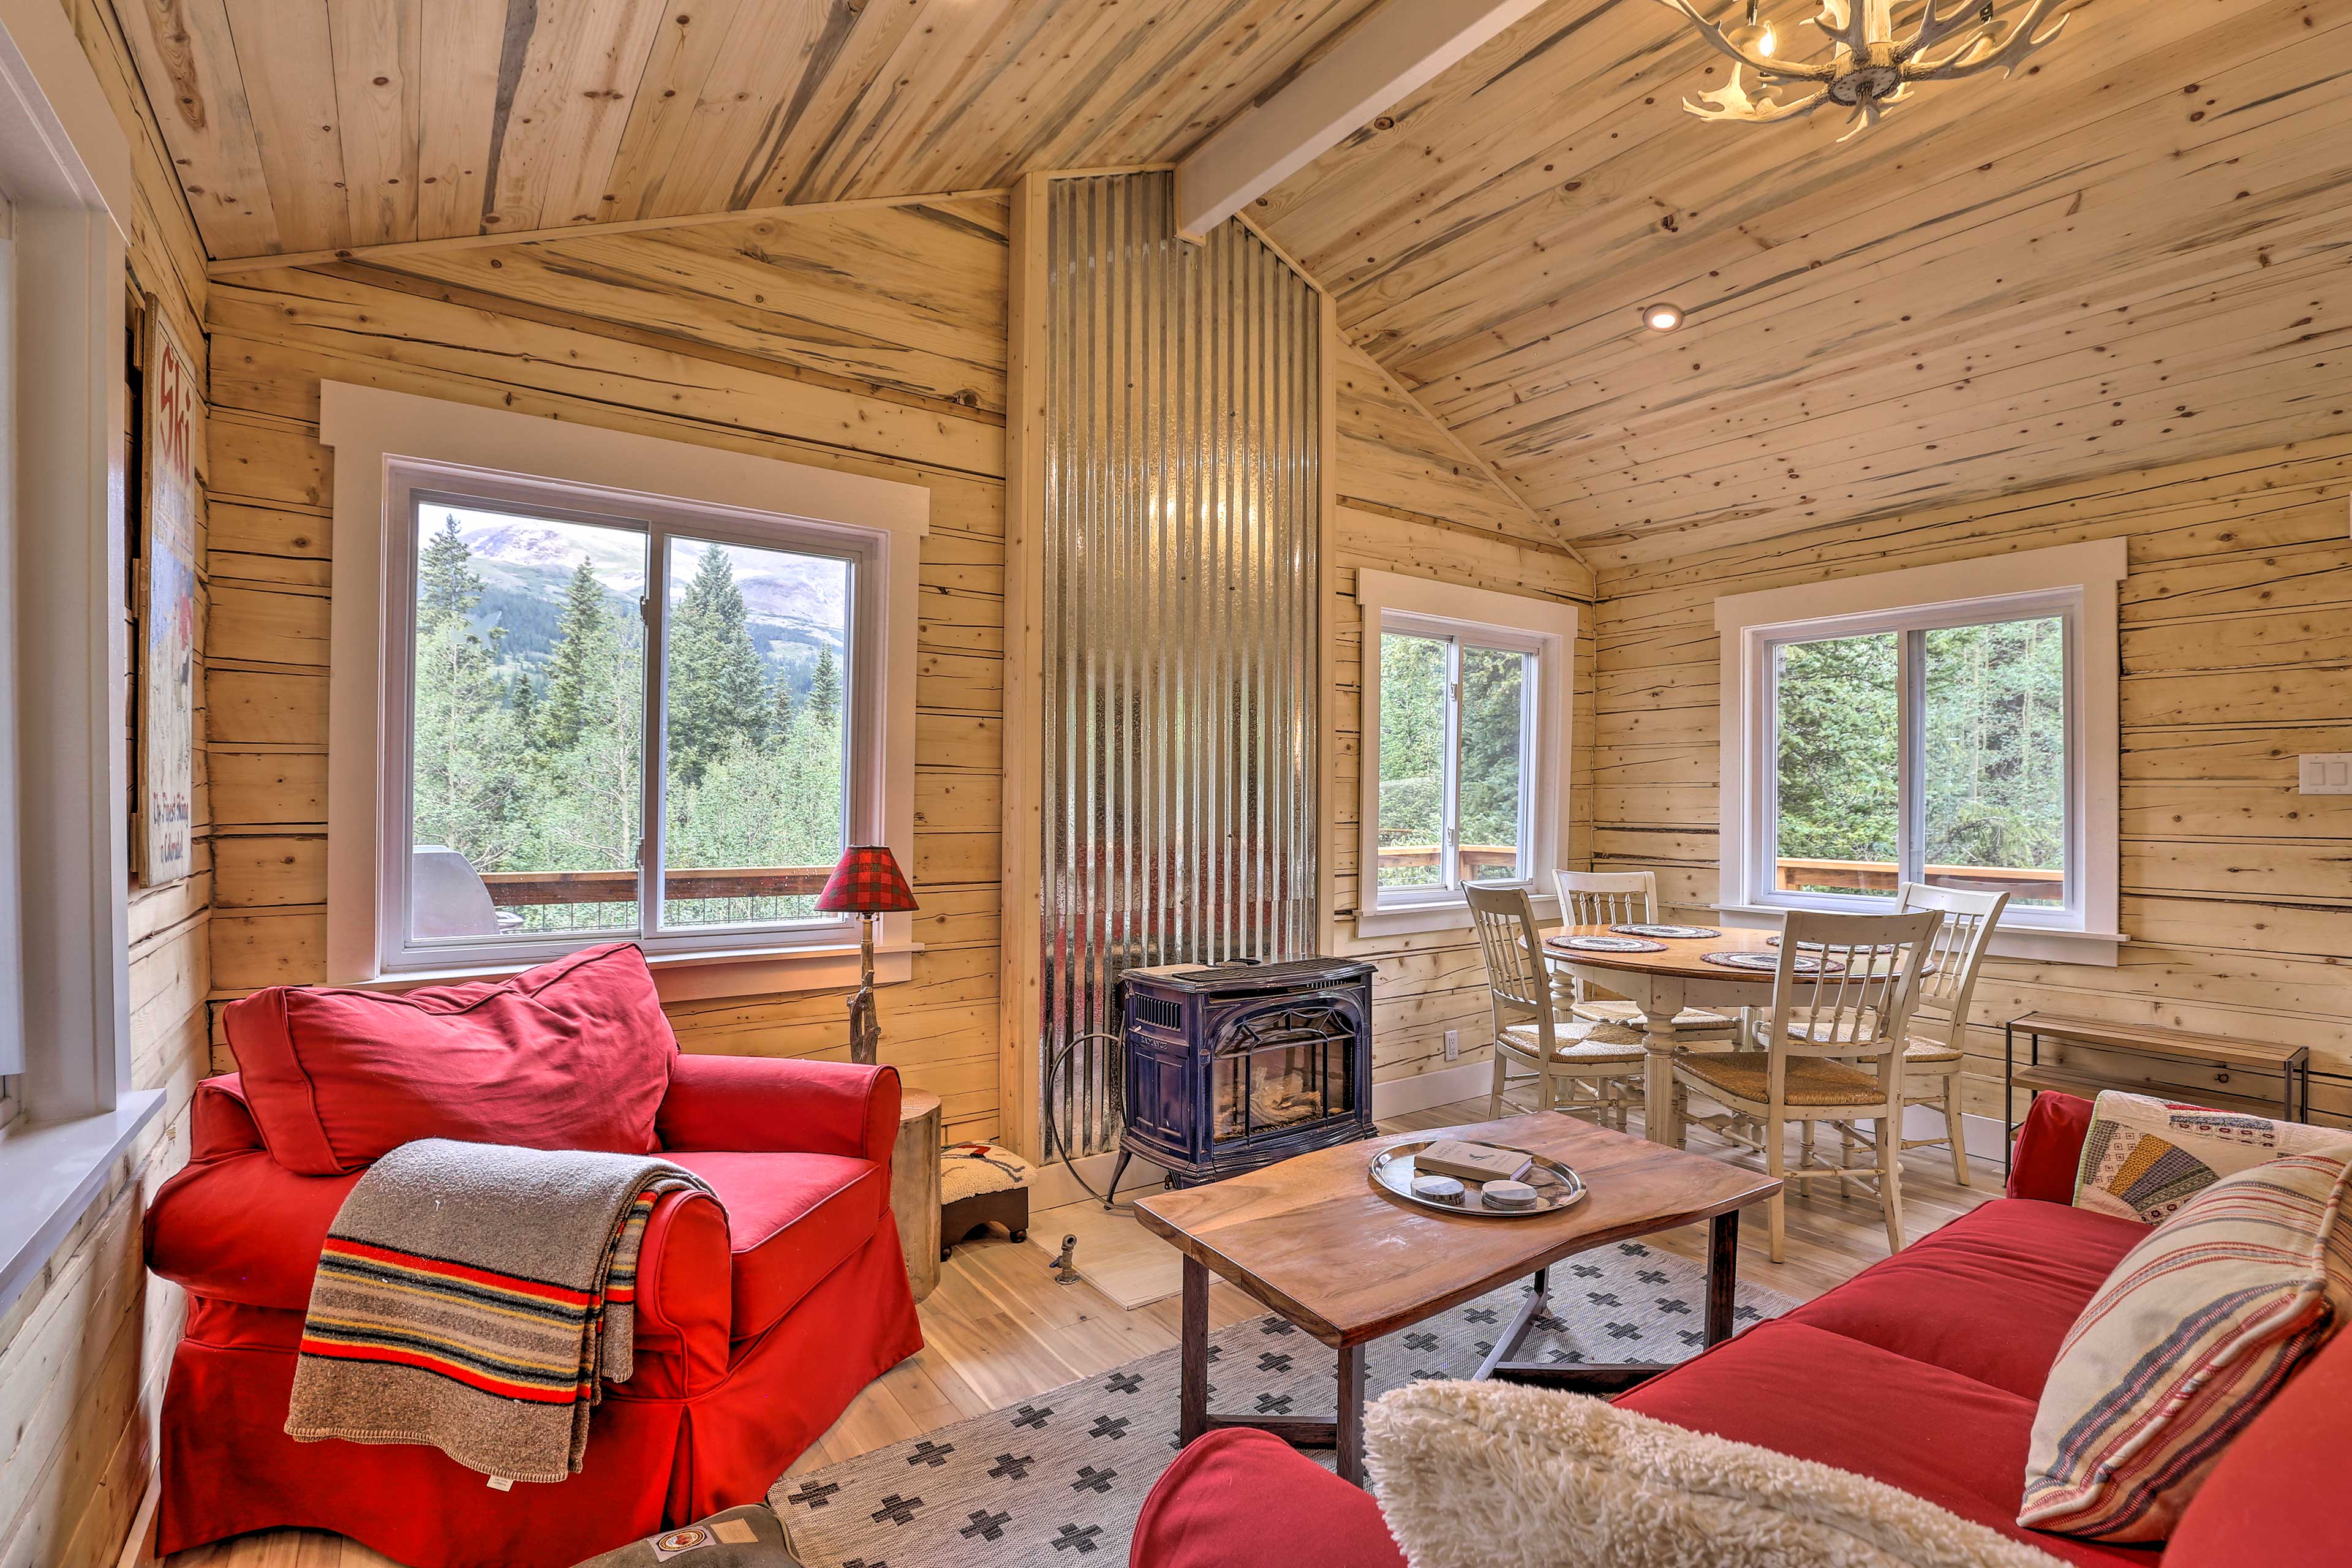 This modern cabin offers all the luxuries of home.